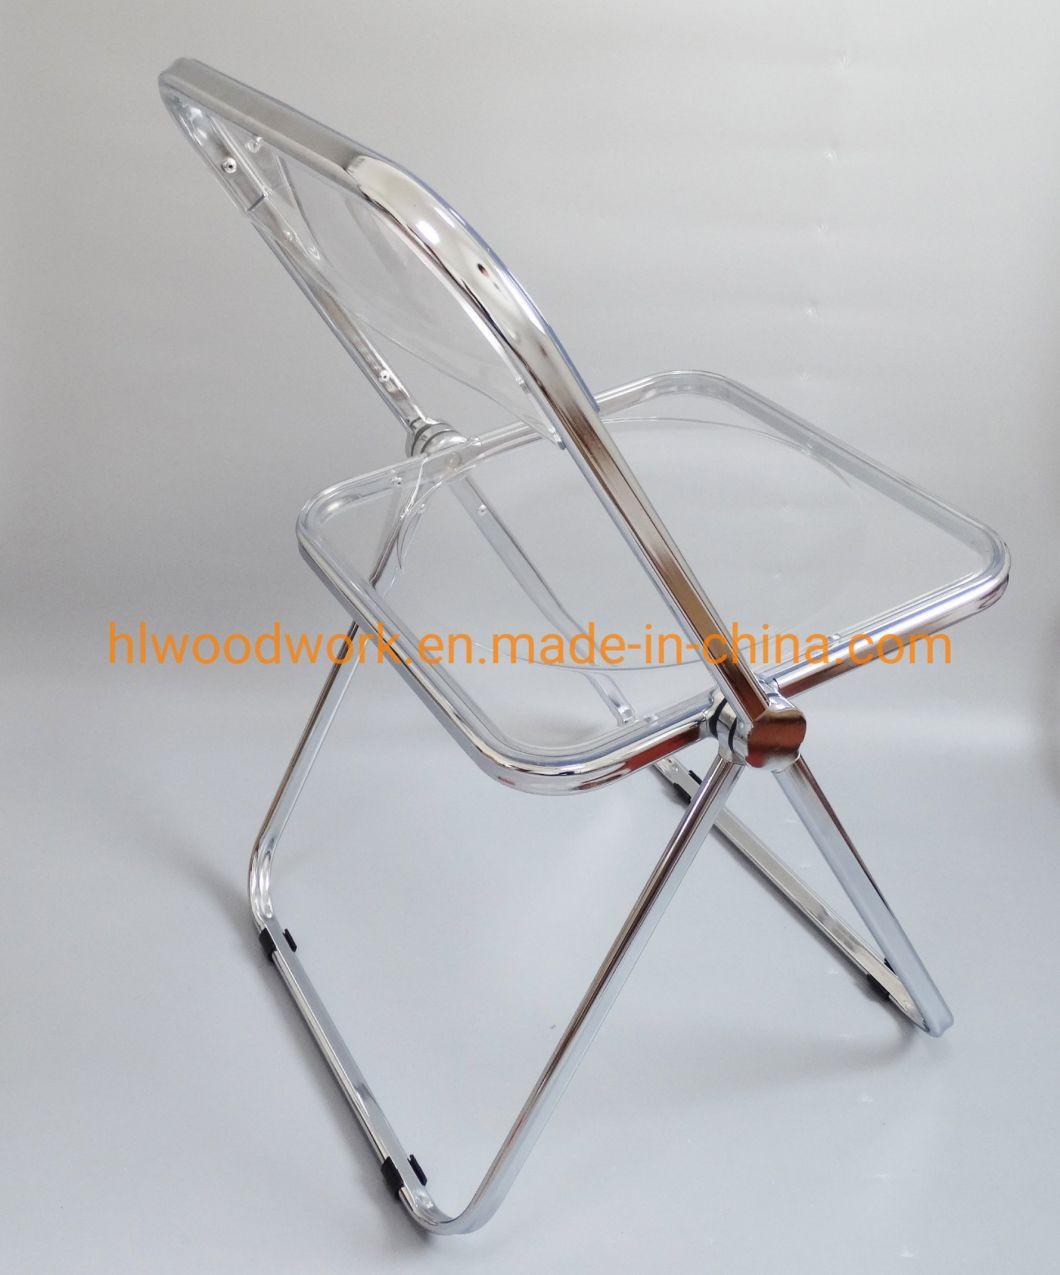 Modern Transparent Brown Folding Chair PC Plastic Living Room Chair Chrome Frame Office Bar Dining Leisure Banquet Wedding Meeting Chair Plastic Dining Chair